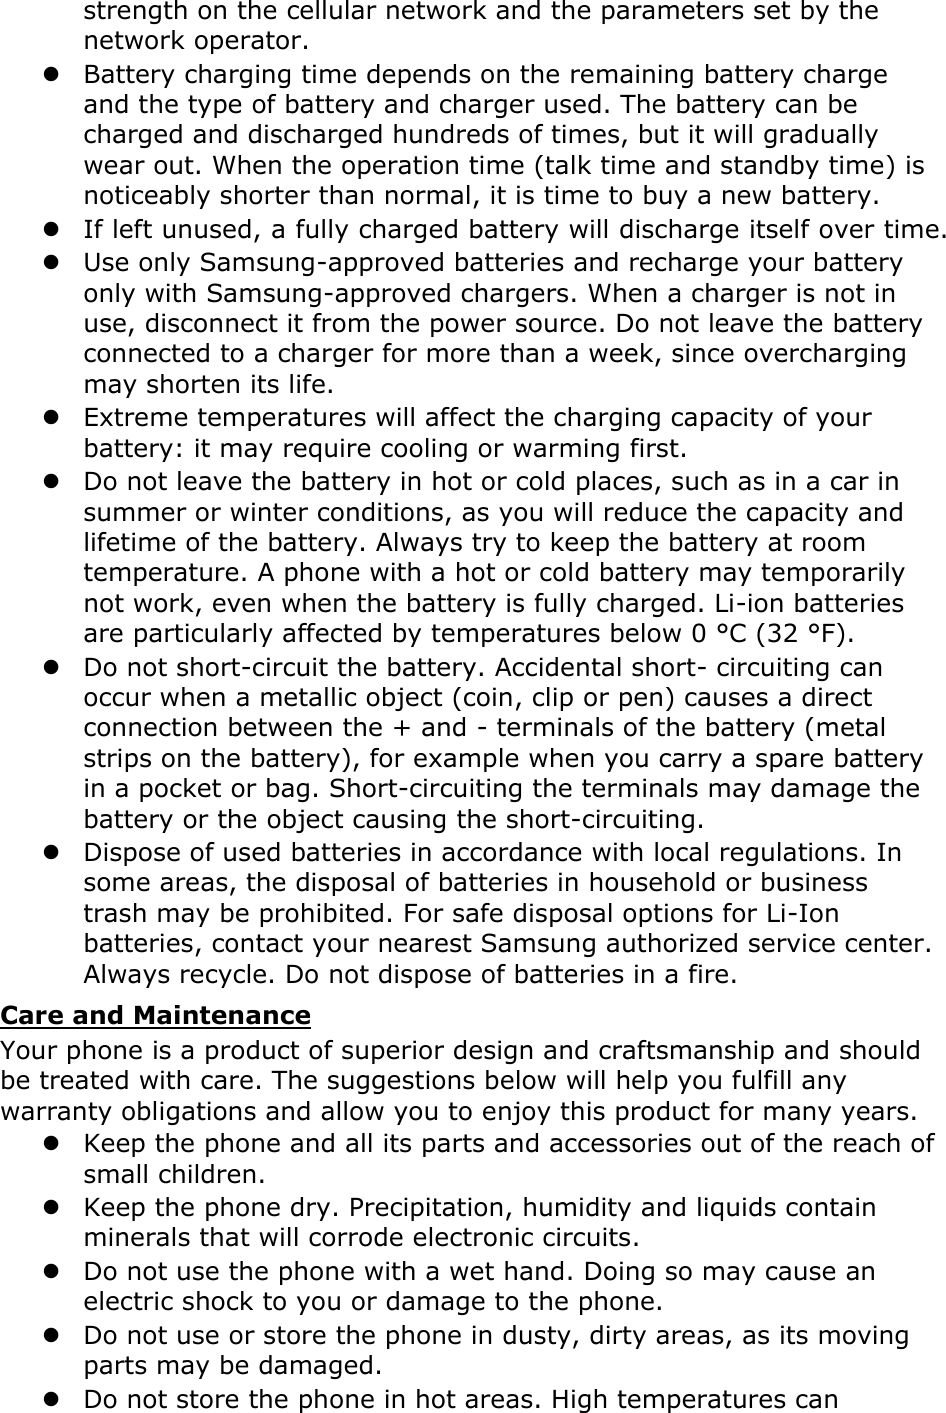 Page 19 of Samsung Electronics Co GTI8350T Cellular/PCS GSM/EDGE and Cellular WCDMA Phone with WLAN and Bluetooth User Manual